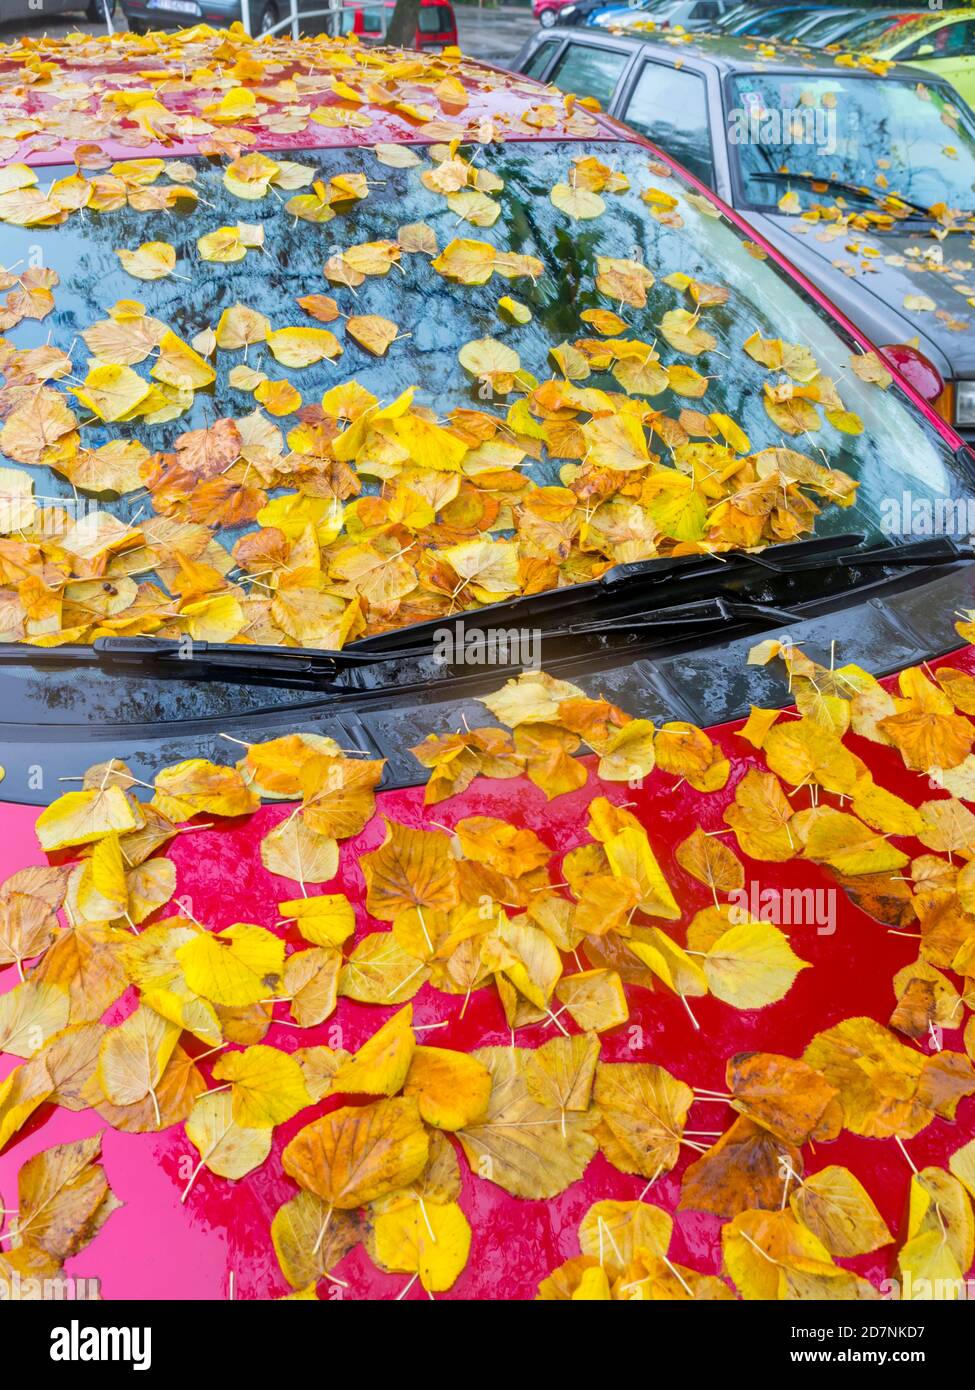 Fallen linden leaves on atop Red parked car vehicle Autumnal Autumn Fall season front windshield crop cropped view Stock Photo